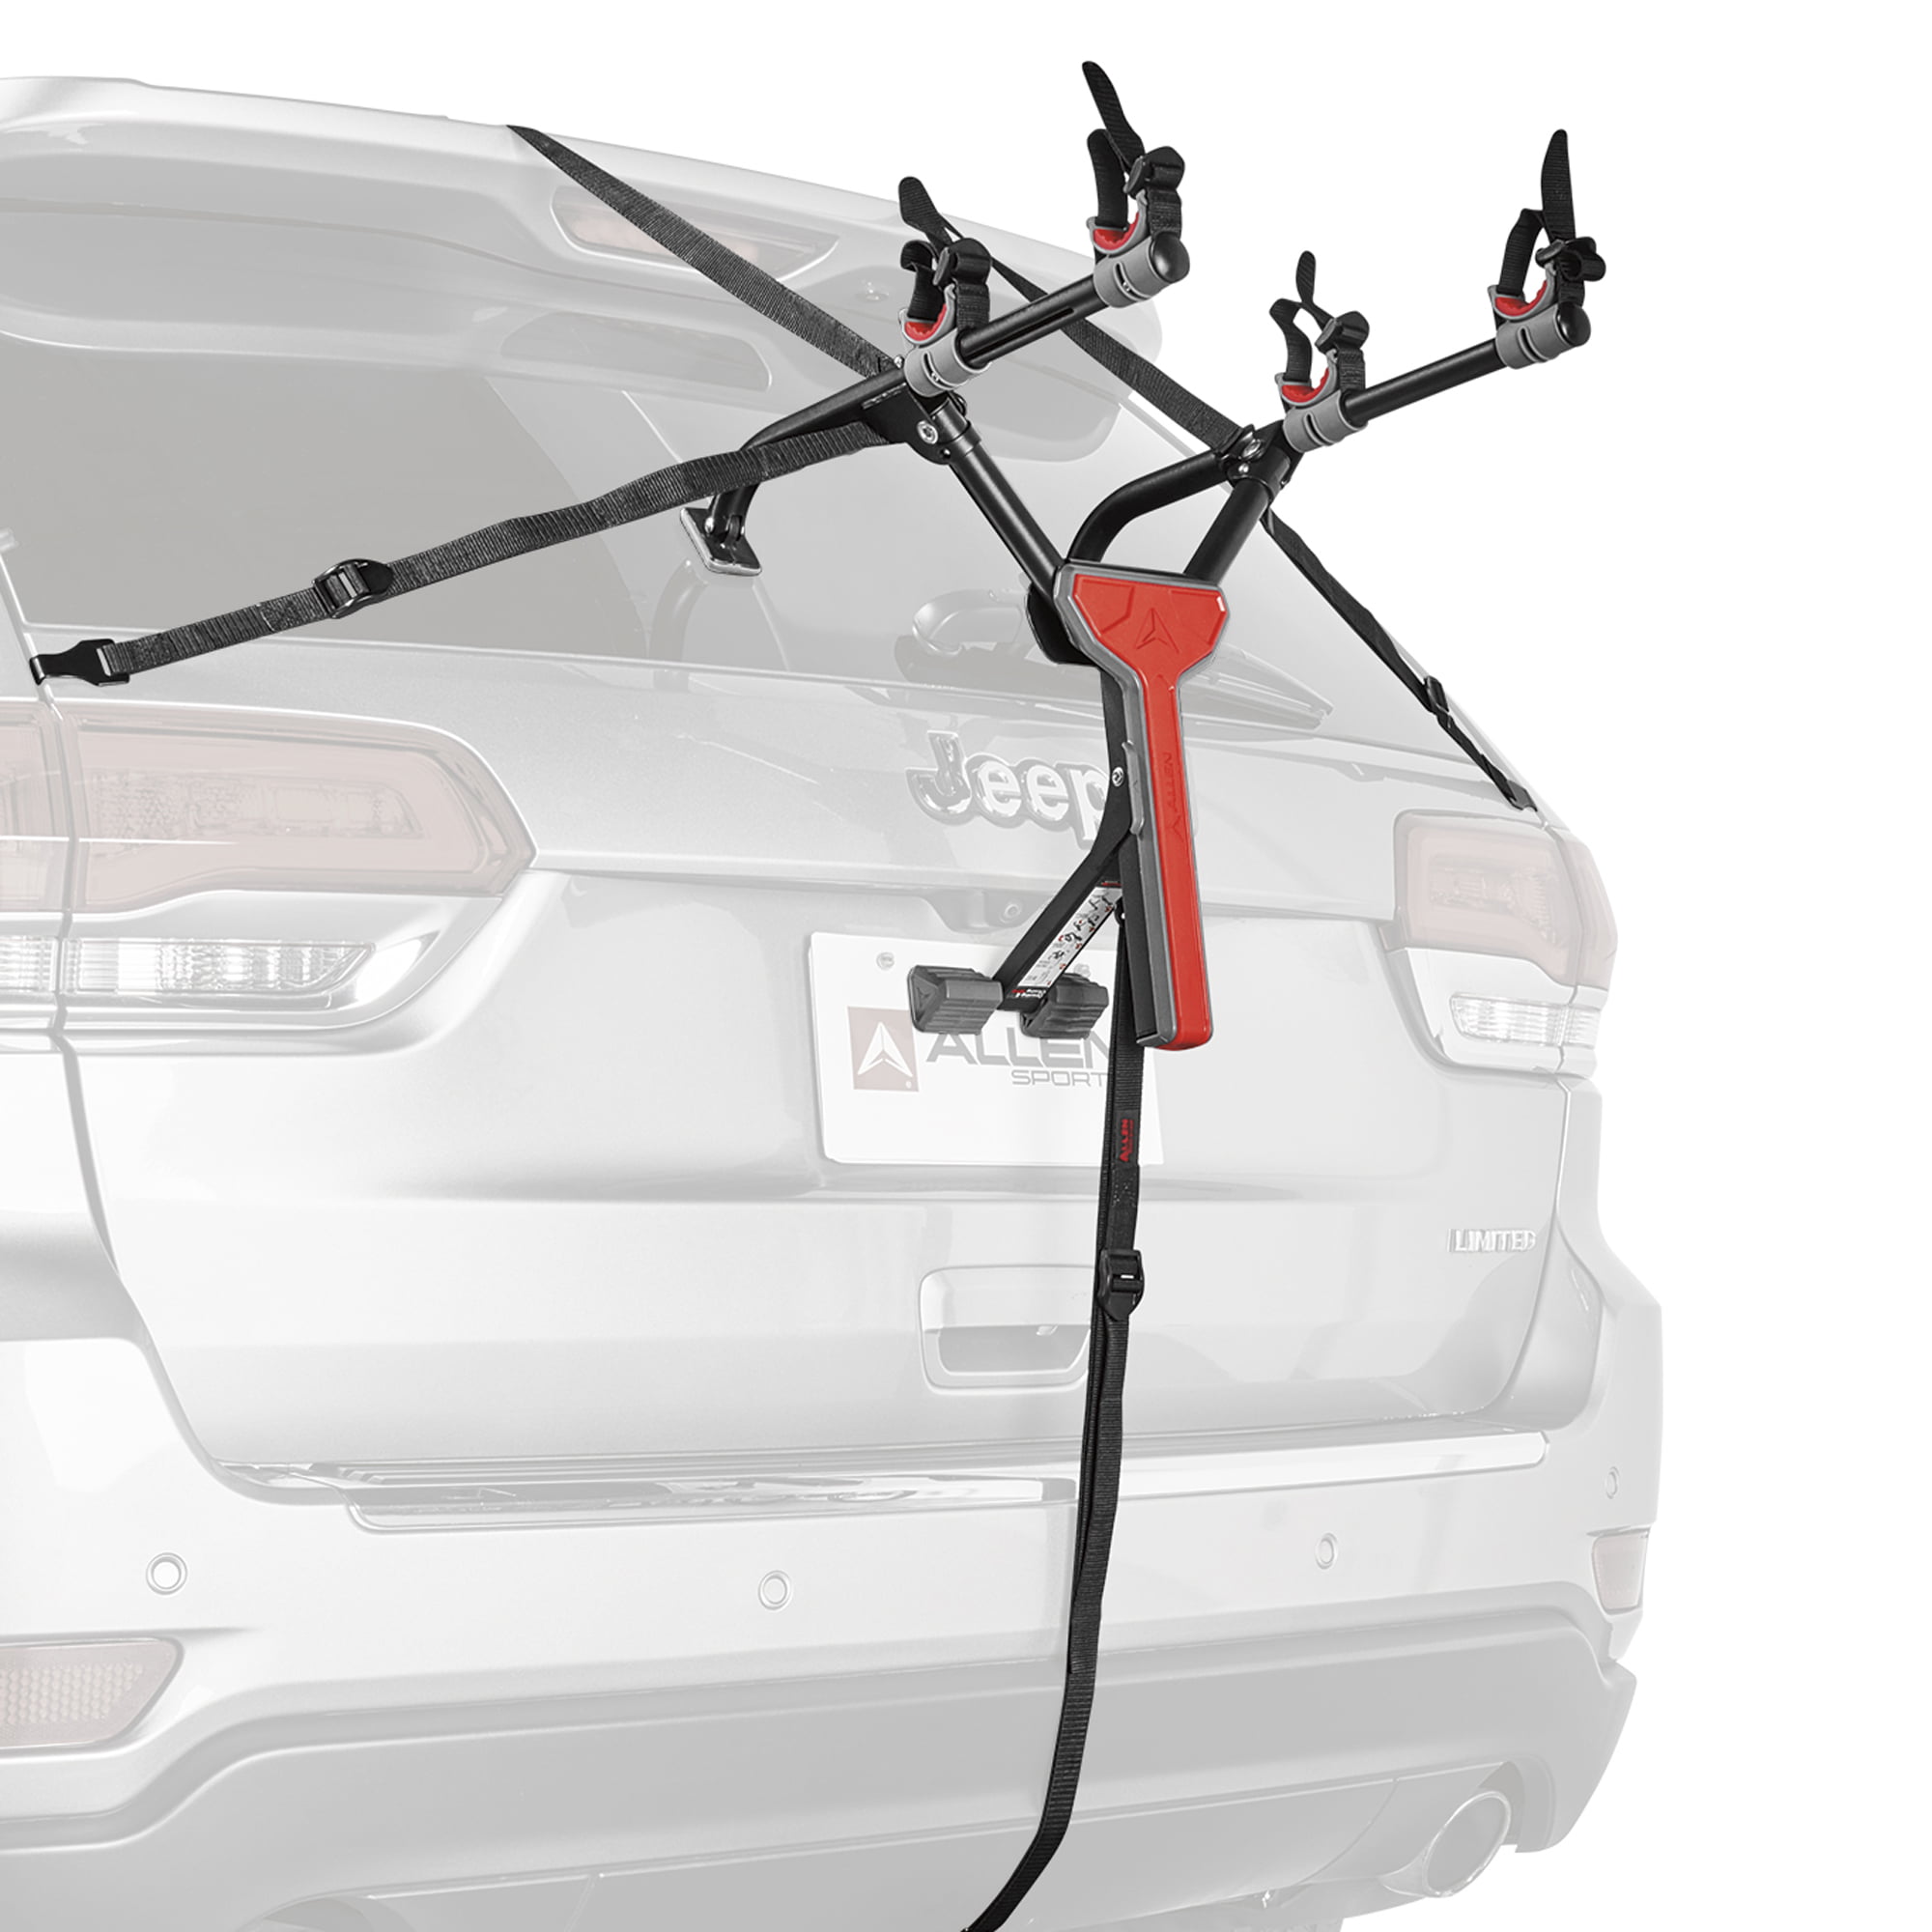 Cable Lock Tyger Auto TG-RK3B101S 3-Bike Hitch Mount Bicycle Carrier Rack Fits Both 1.25 and 2 Receiver